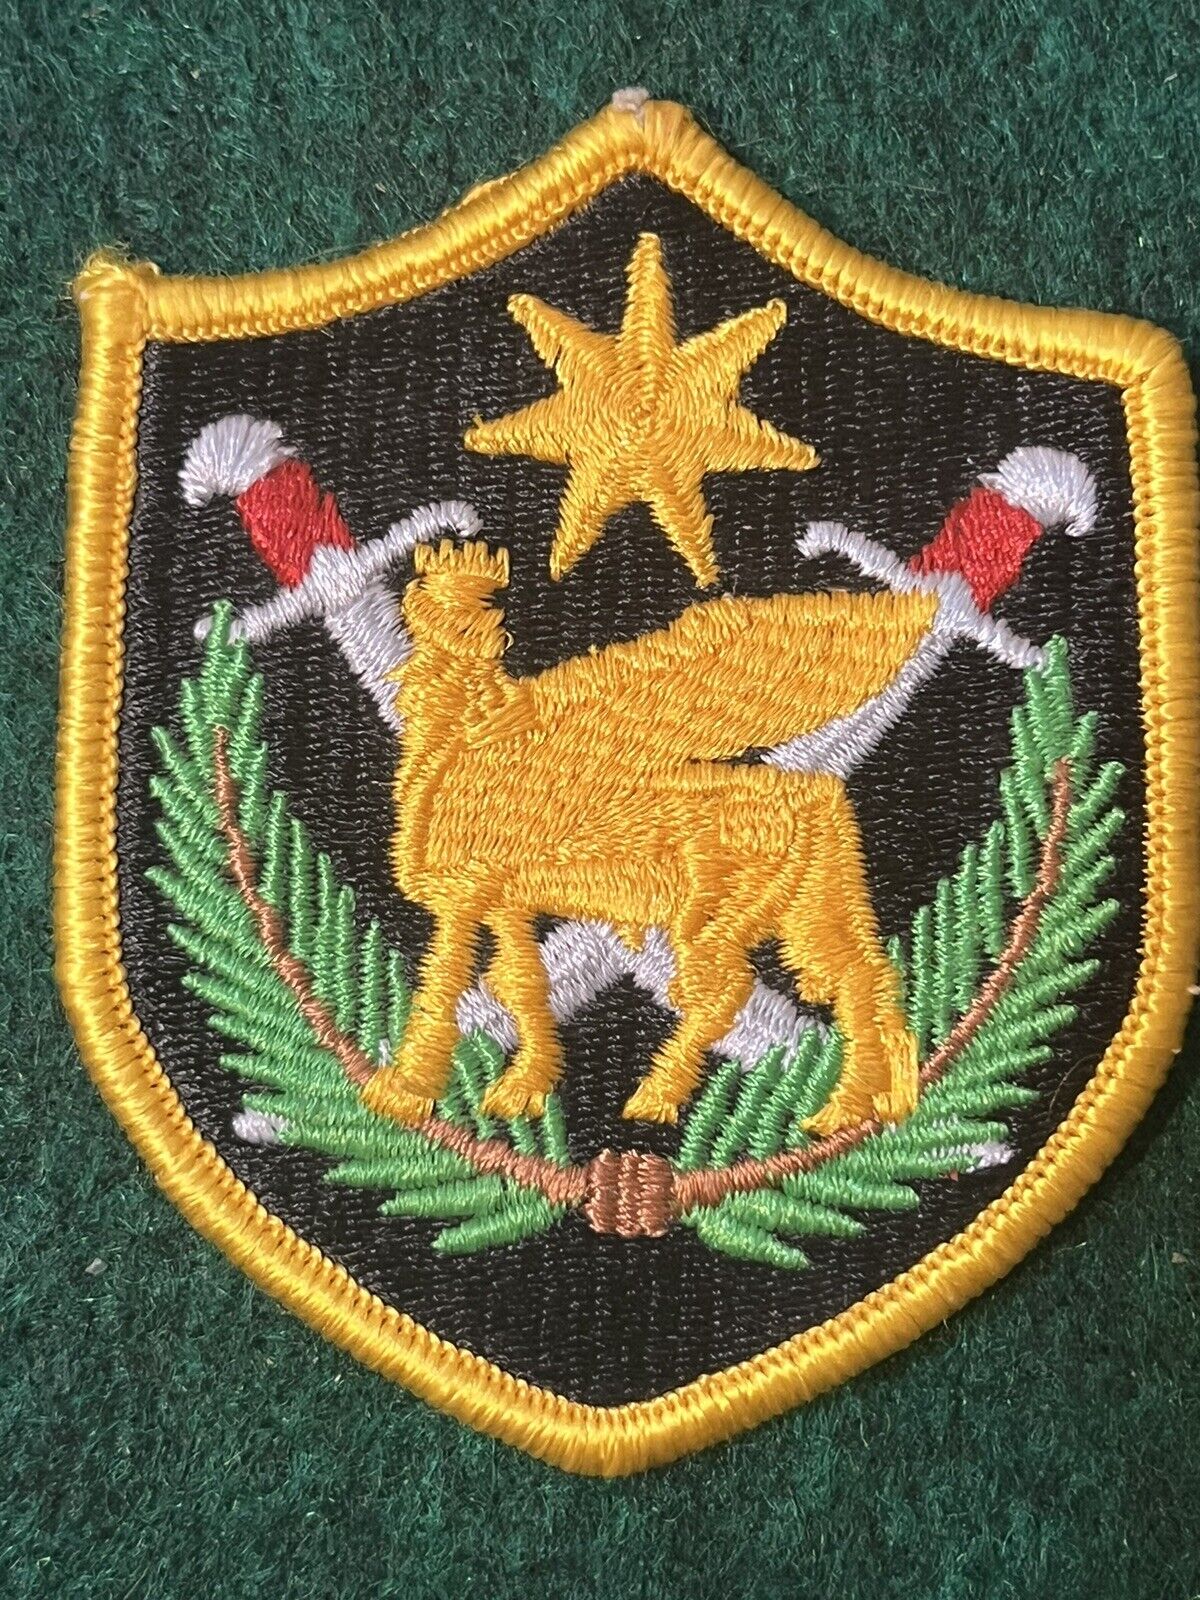 Single Vintage Military Patch